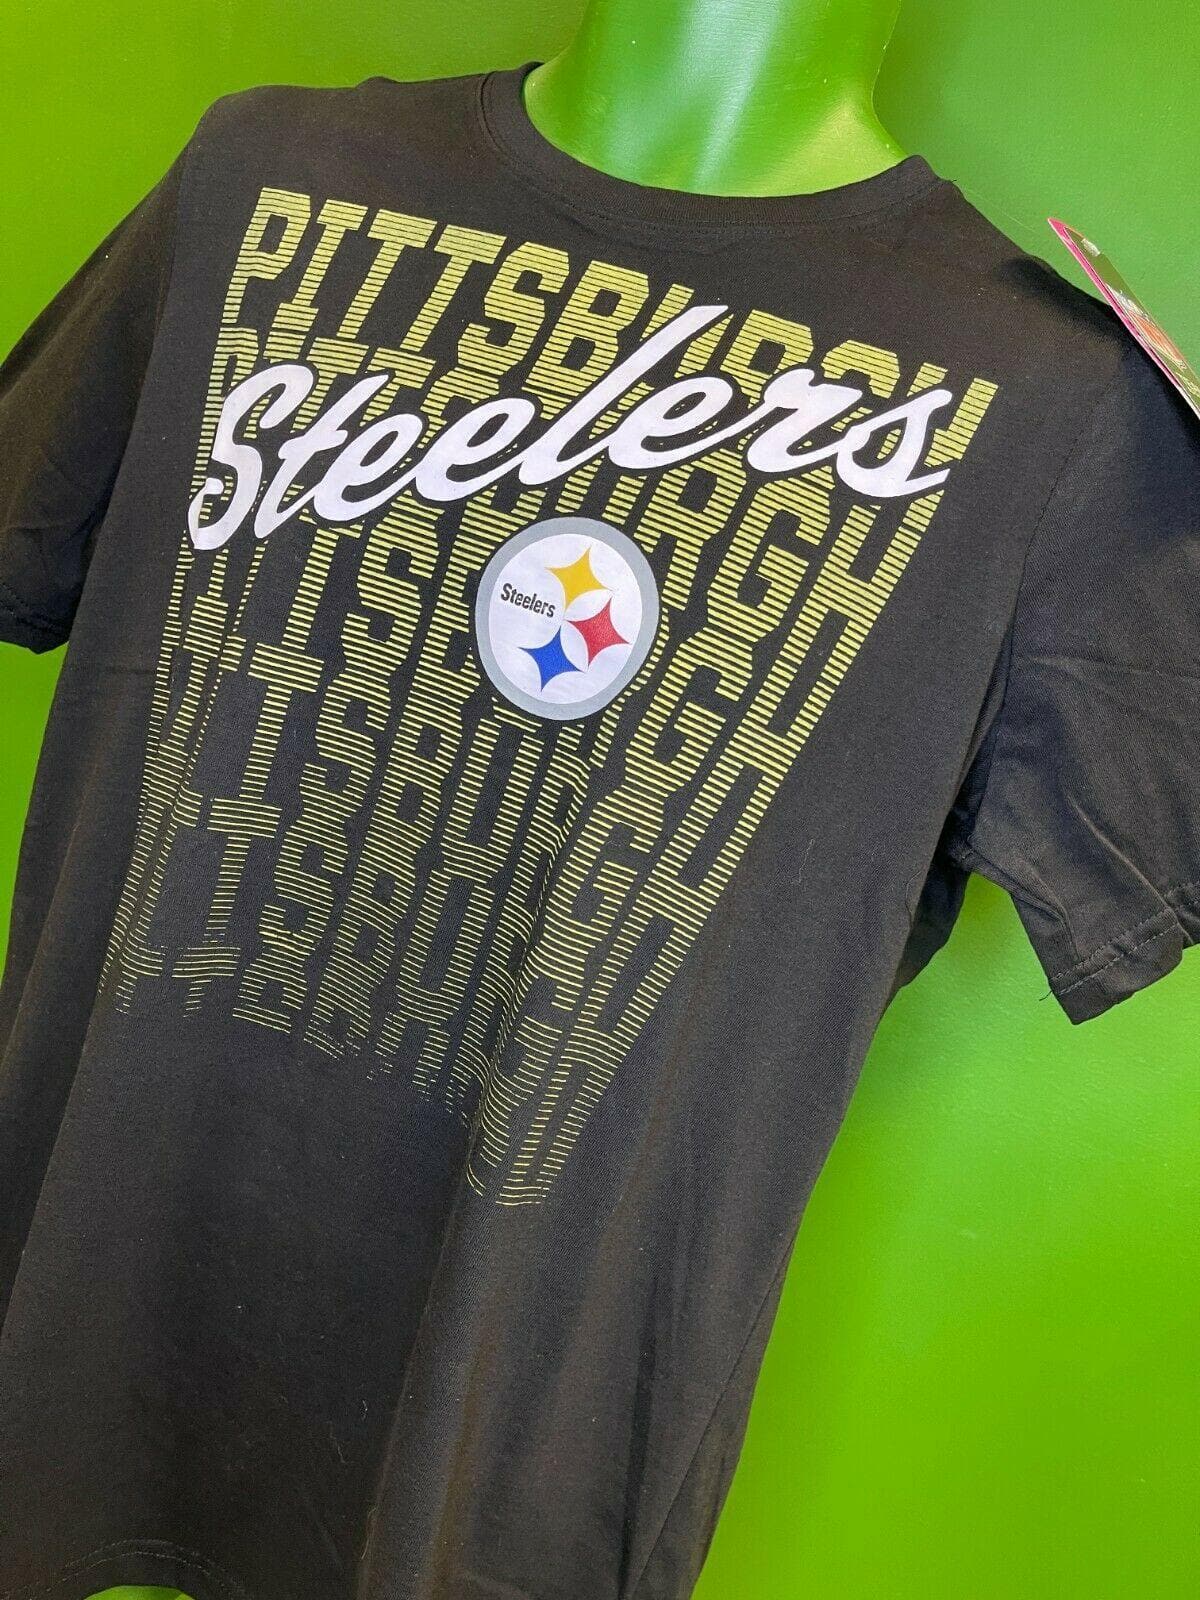 NFL Pittsburgh Steelers Majestic Women's Plus Size T-Shirt Large NWT